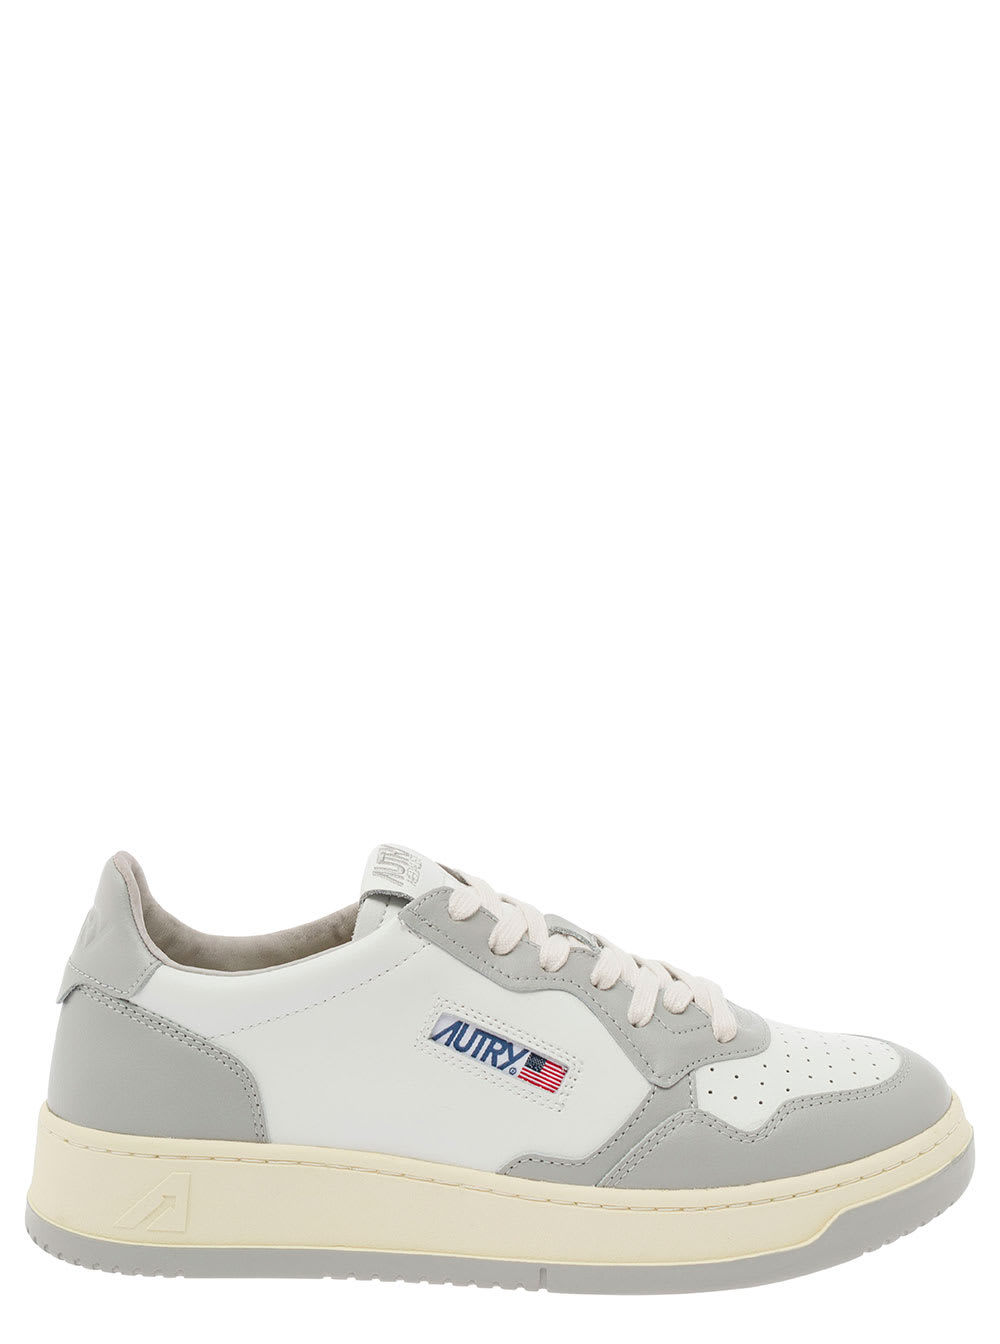 AUTRY MEDALIST WHITE AND GREY LOW TOP SNEAKERS WITH LOGO DETAIL IN LEATHER MAN